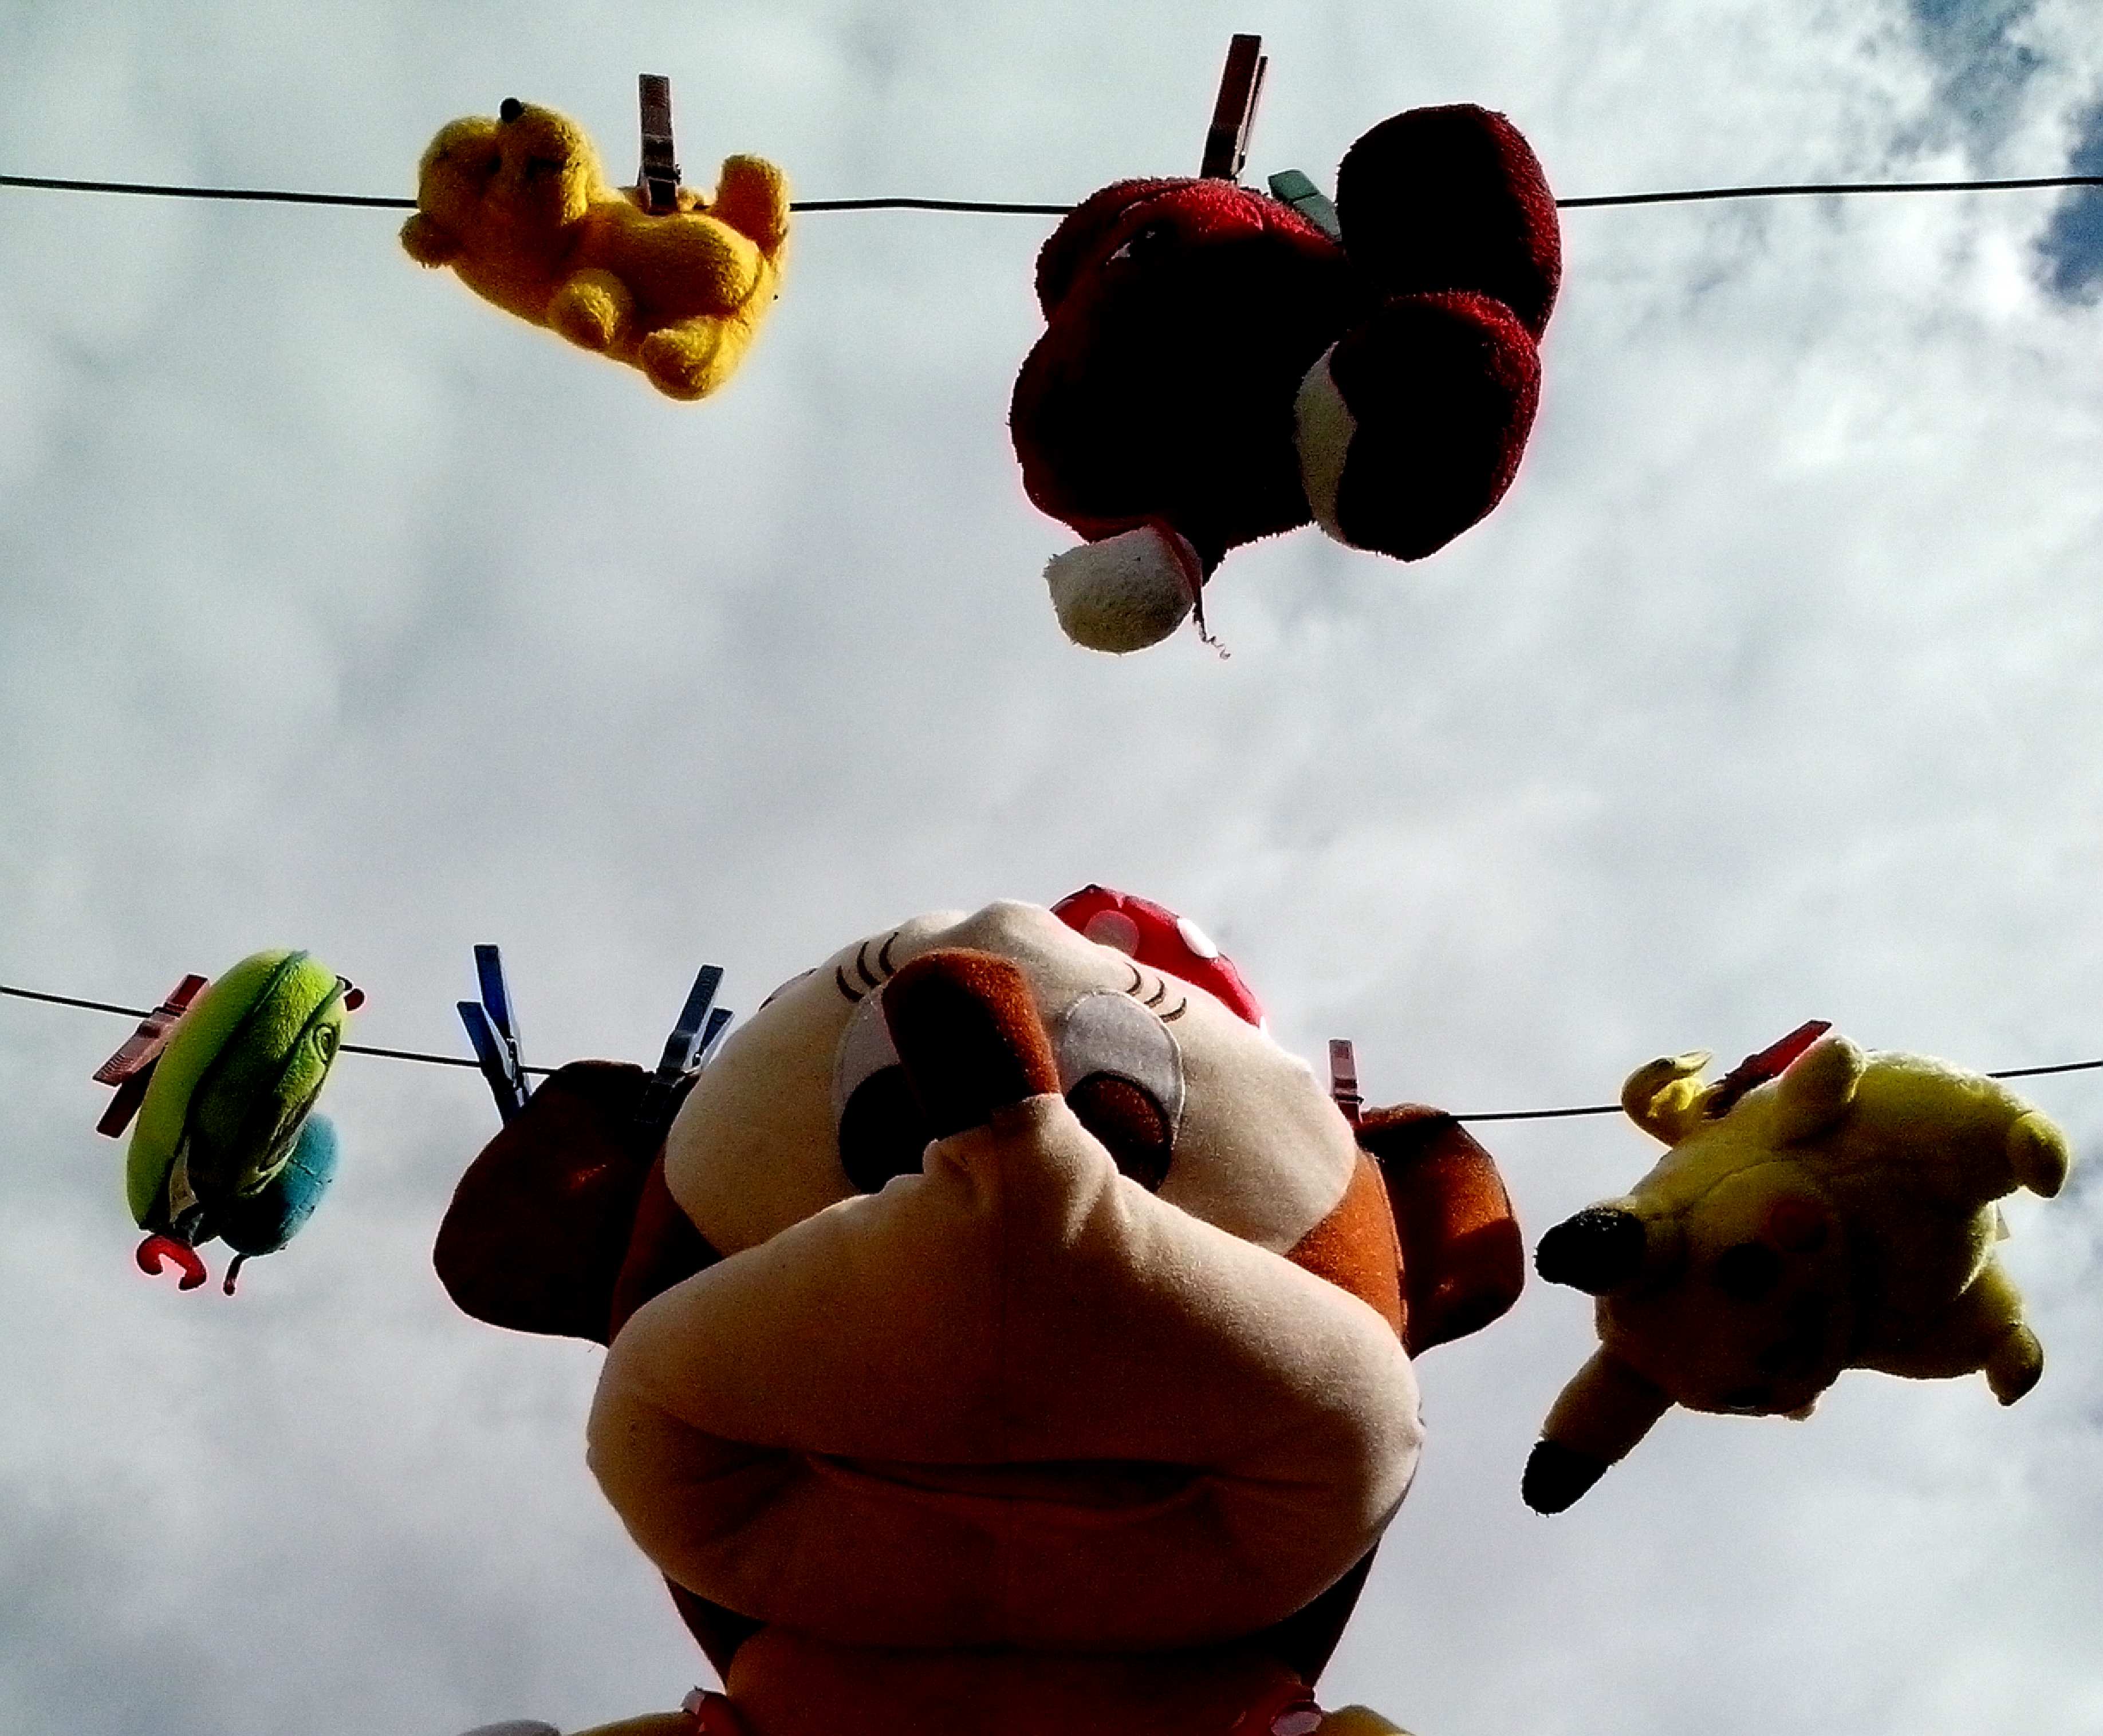 Stuffed toys for the children were dried on the wire after washi